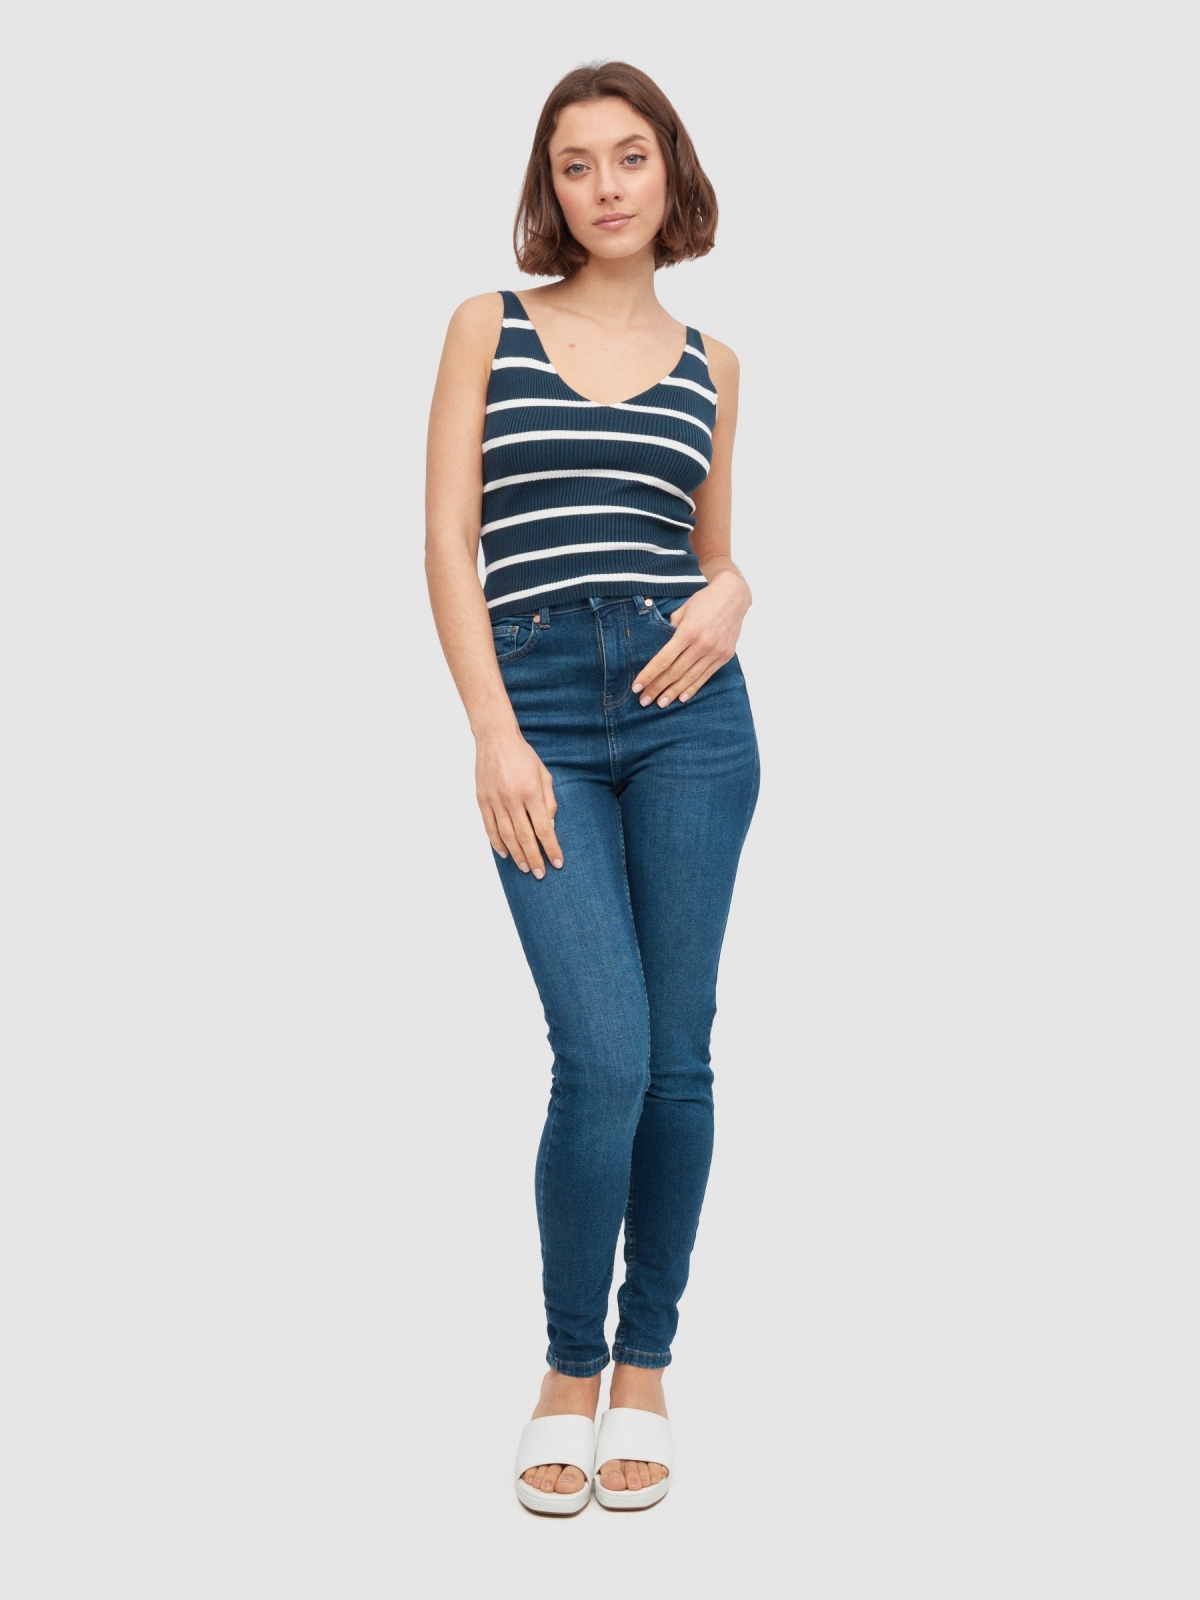 Striped knitted top navy front view